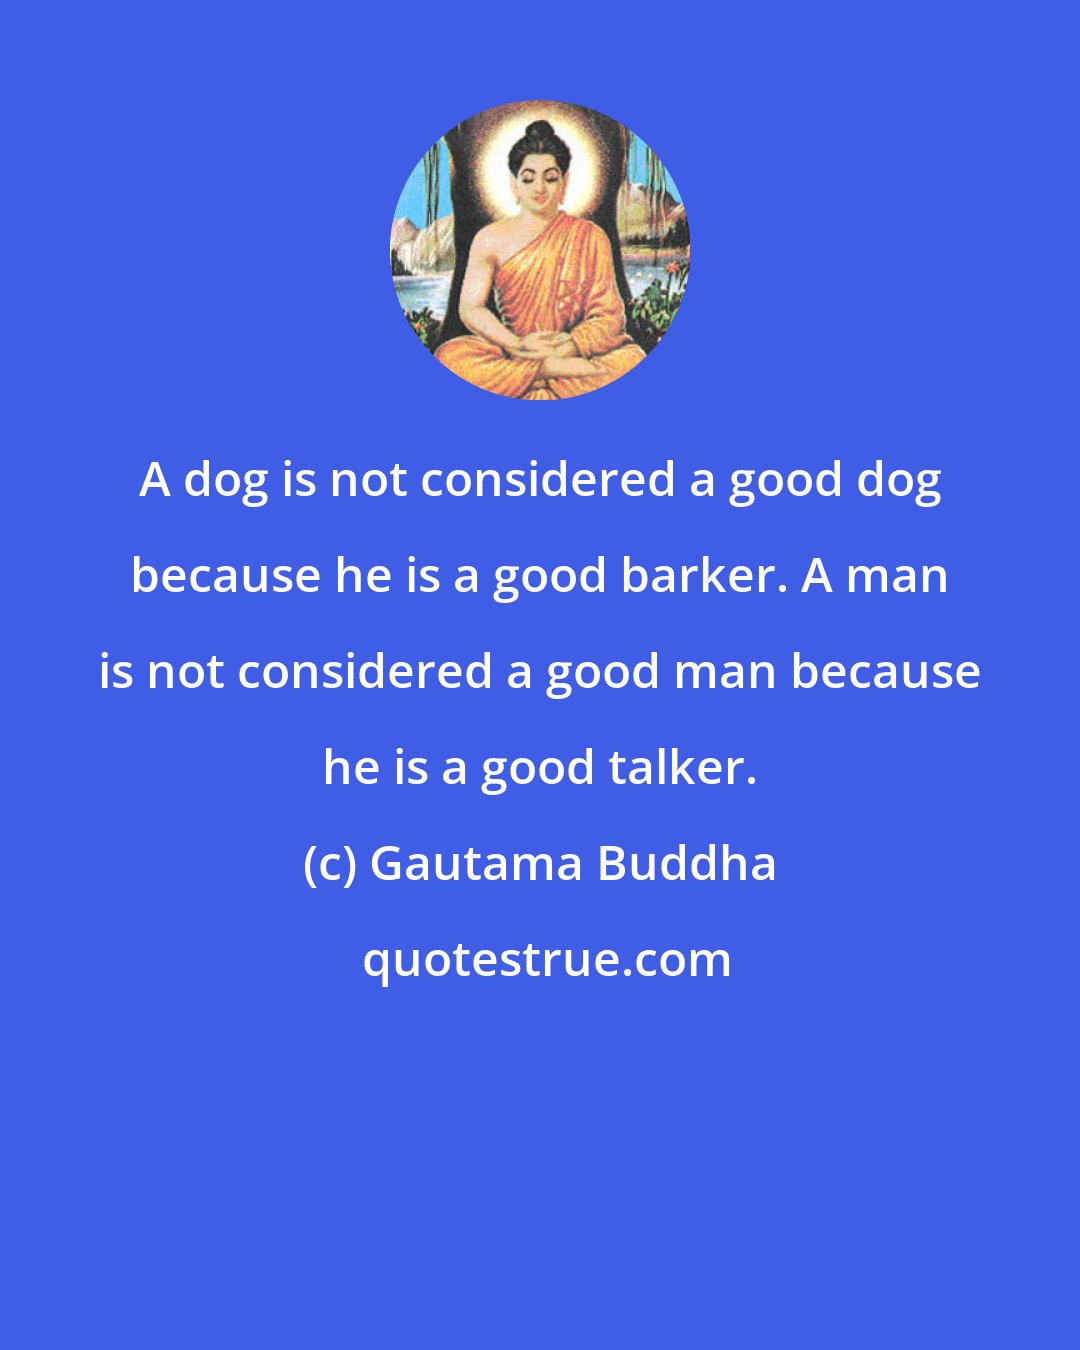 Gautama Buddha: A dog is not considered a good dog because he is a good barker. A man is not considered a good man because he is a good talker.